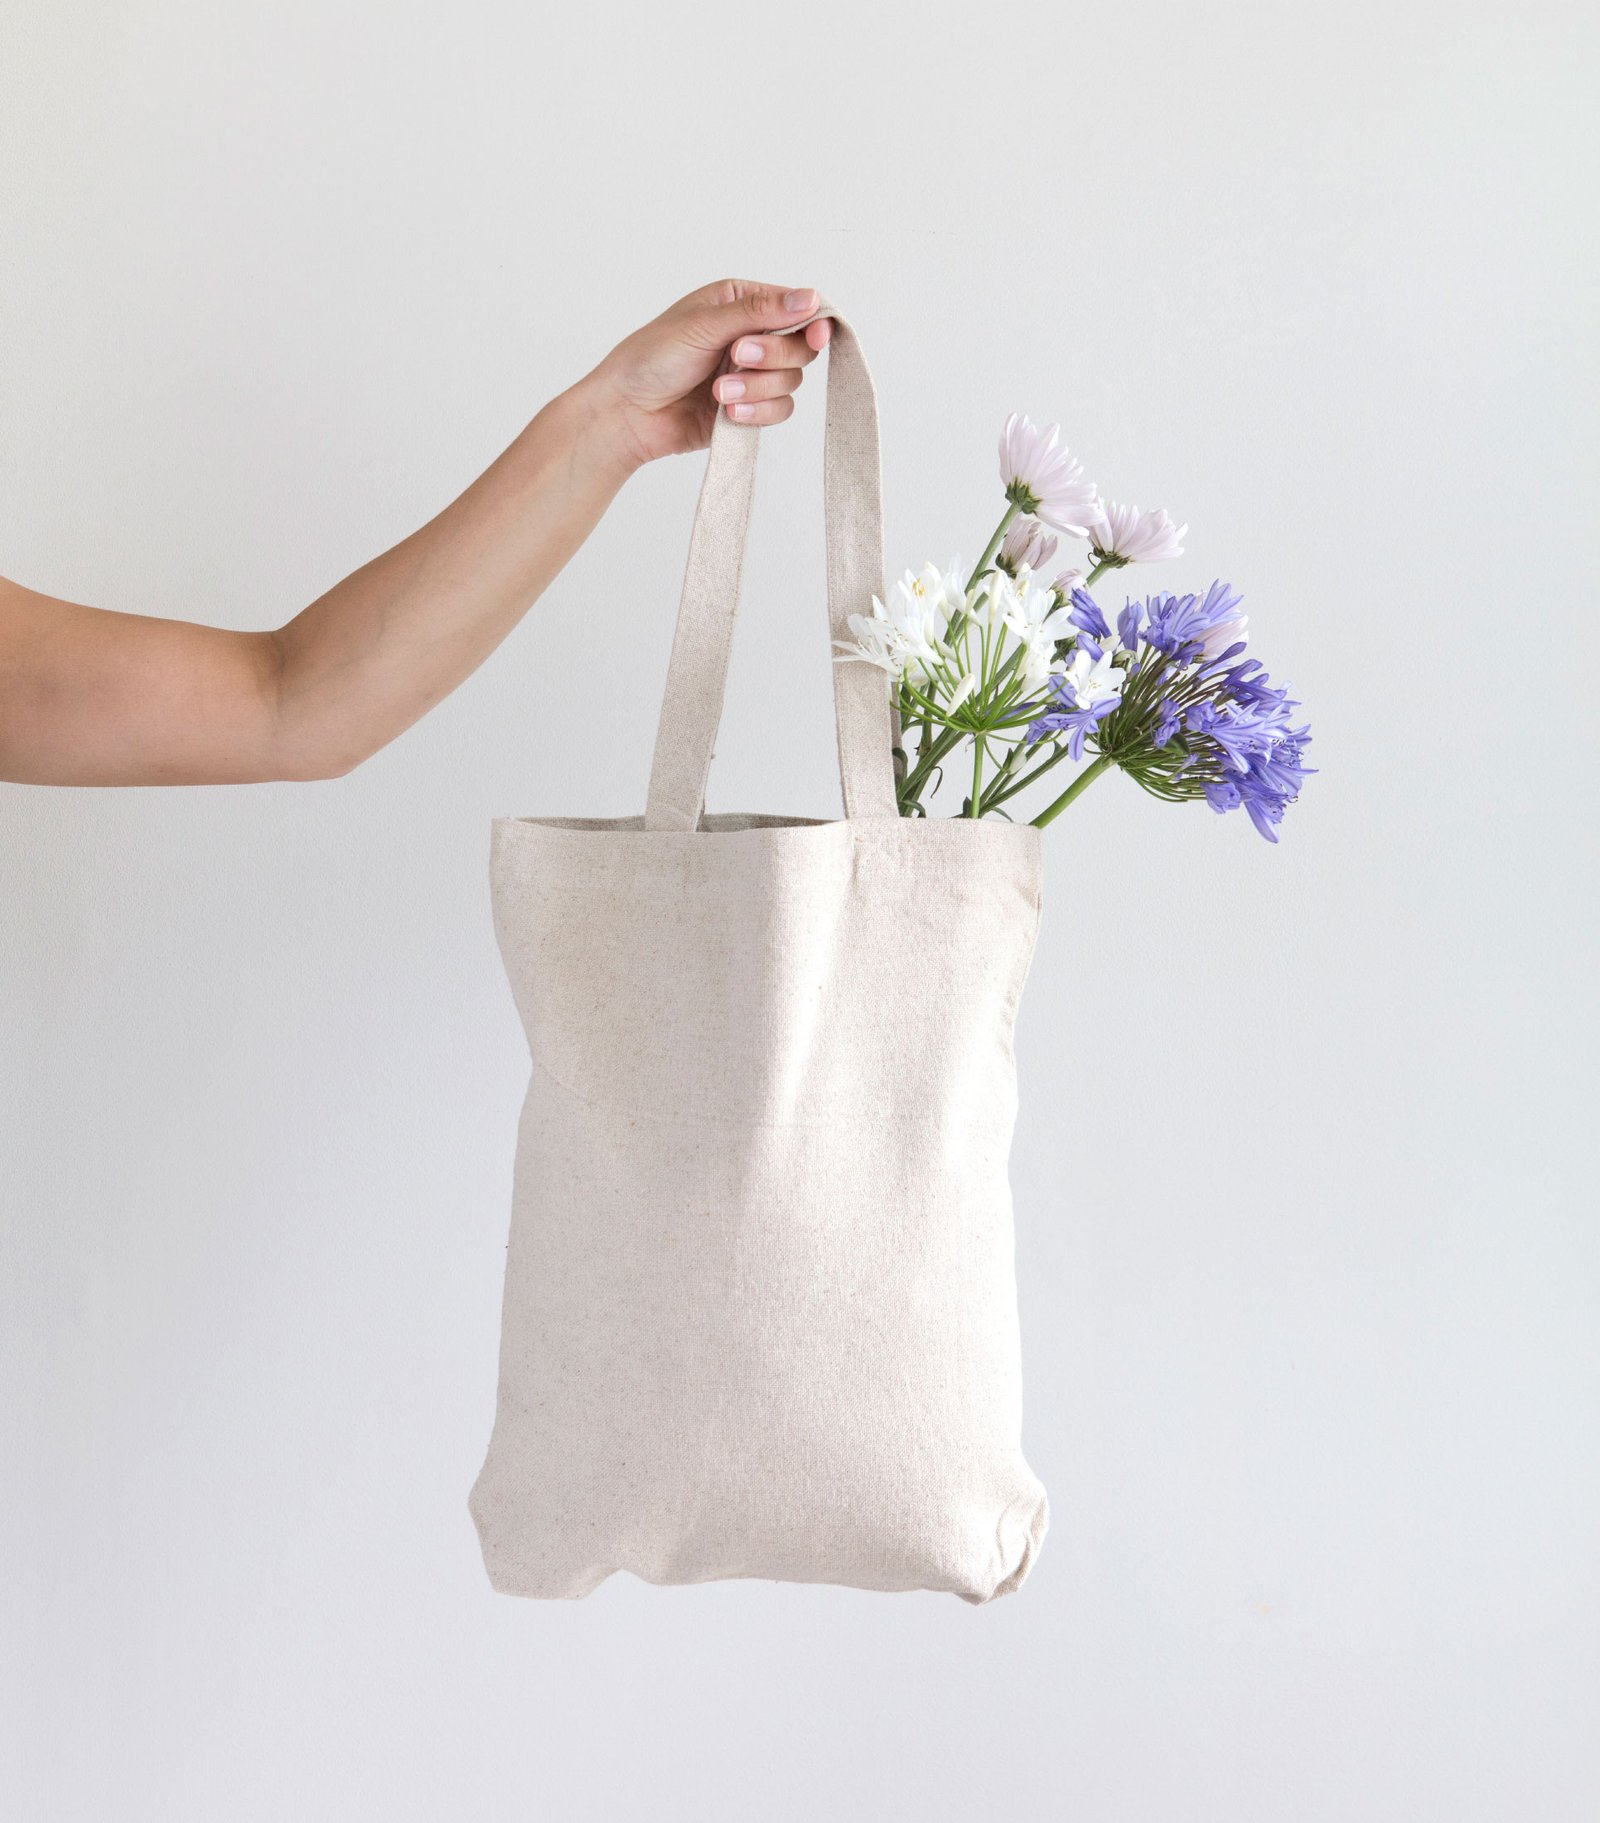 Other Bags | Affordable Well Designed Bags | NZBAGIT